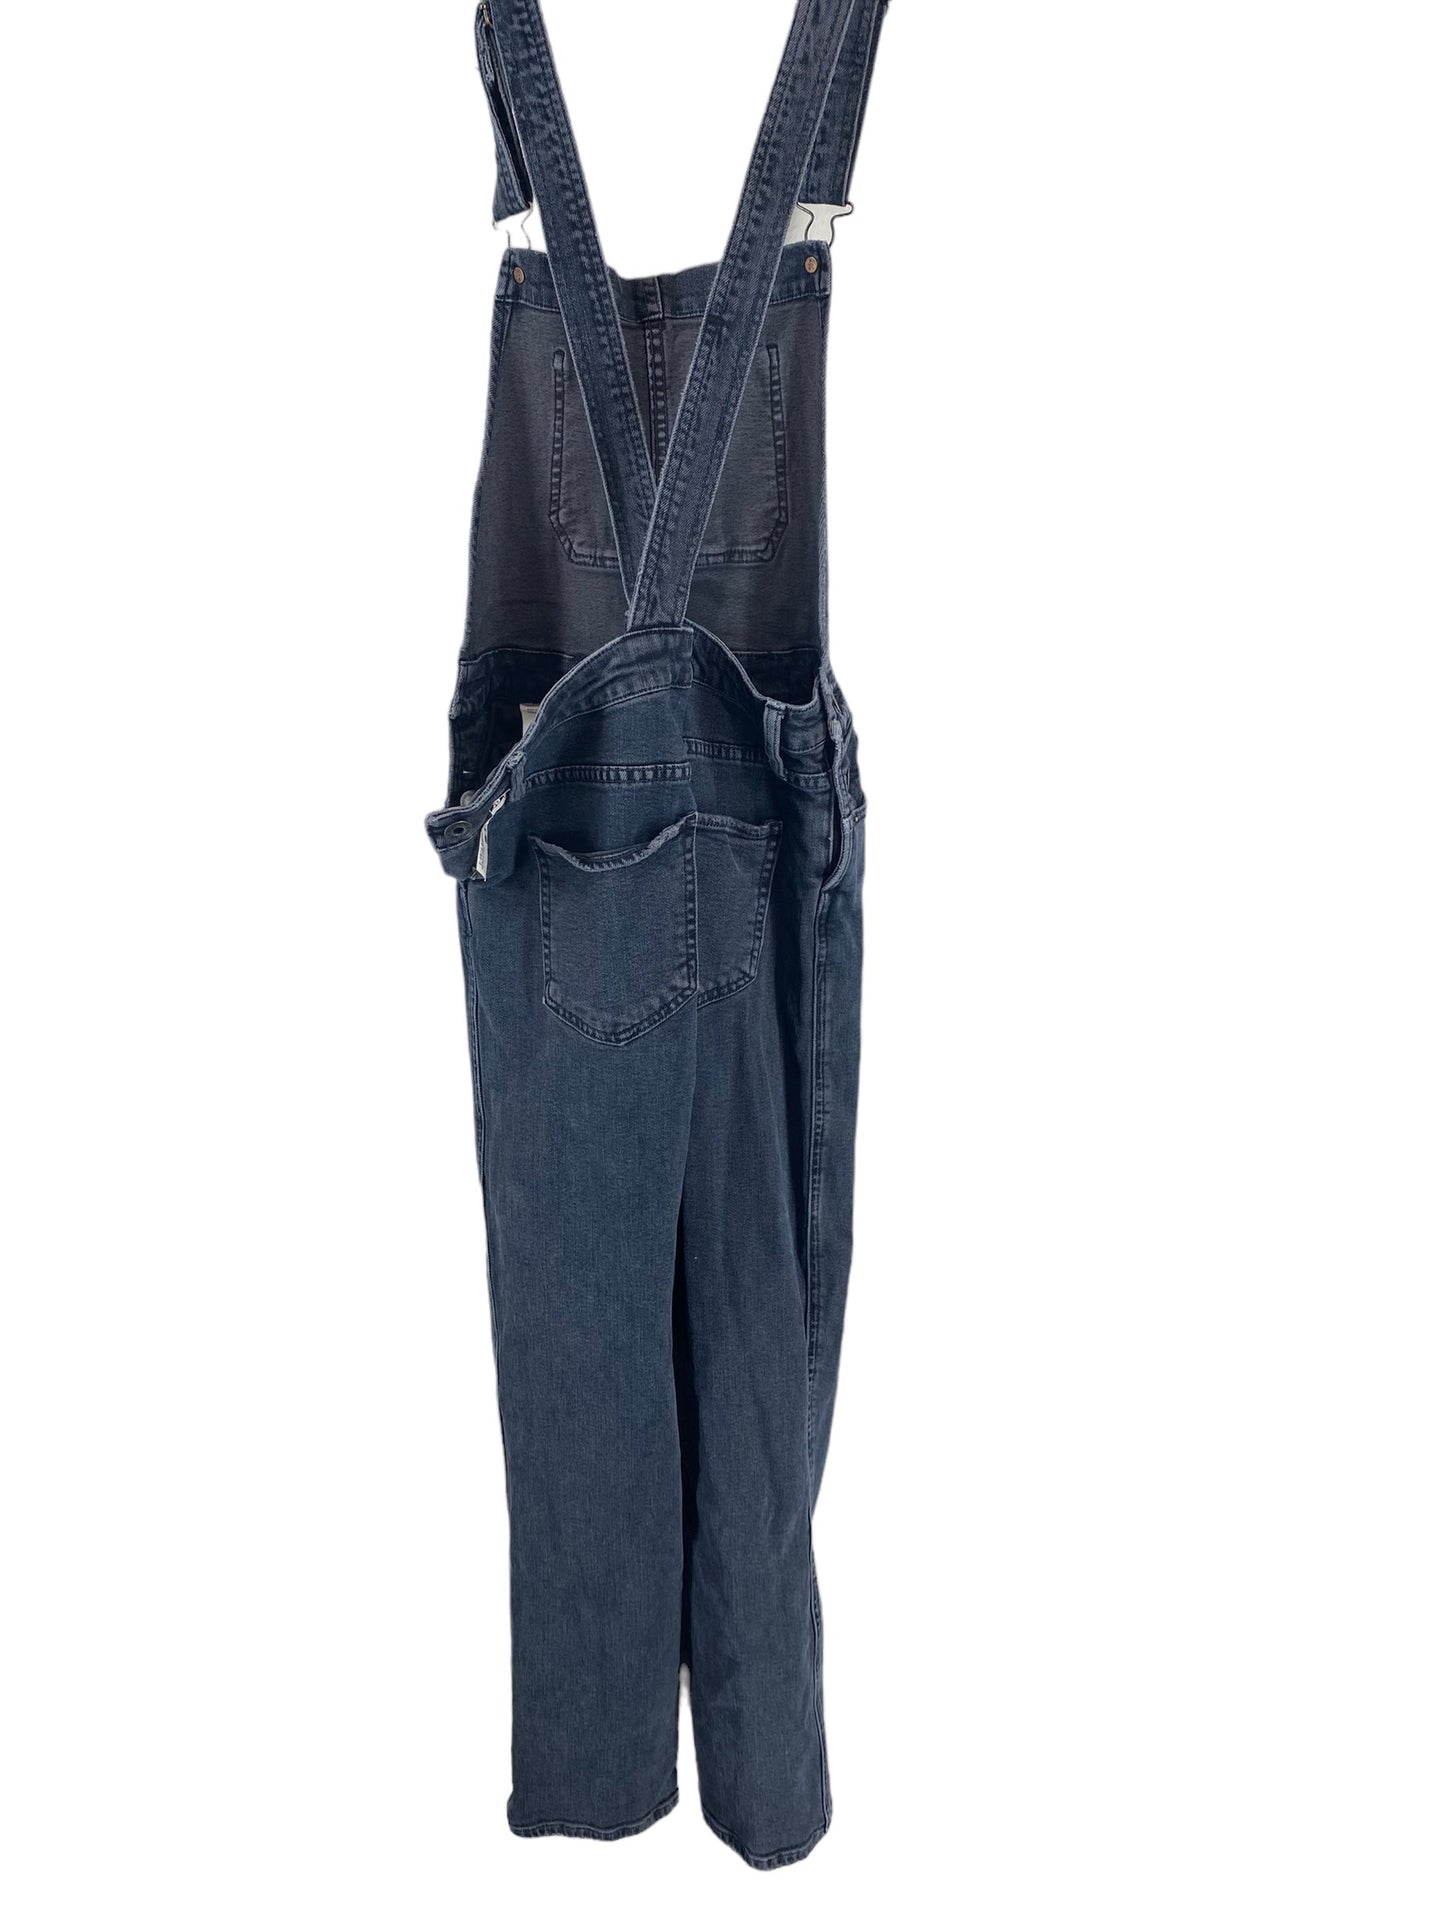 Overalls By Lucky Brand  Size: M